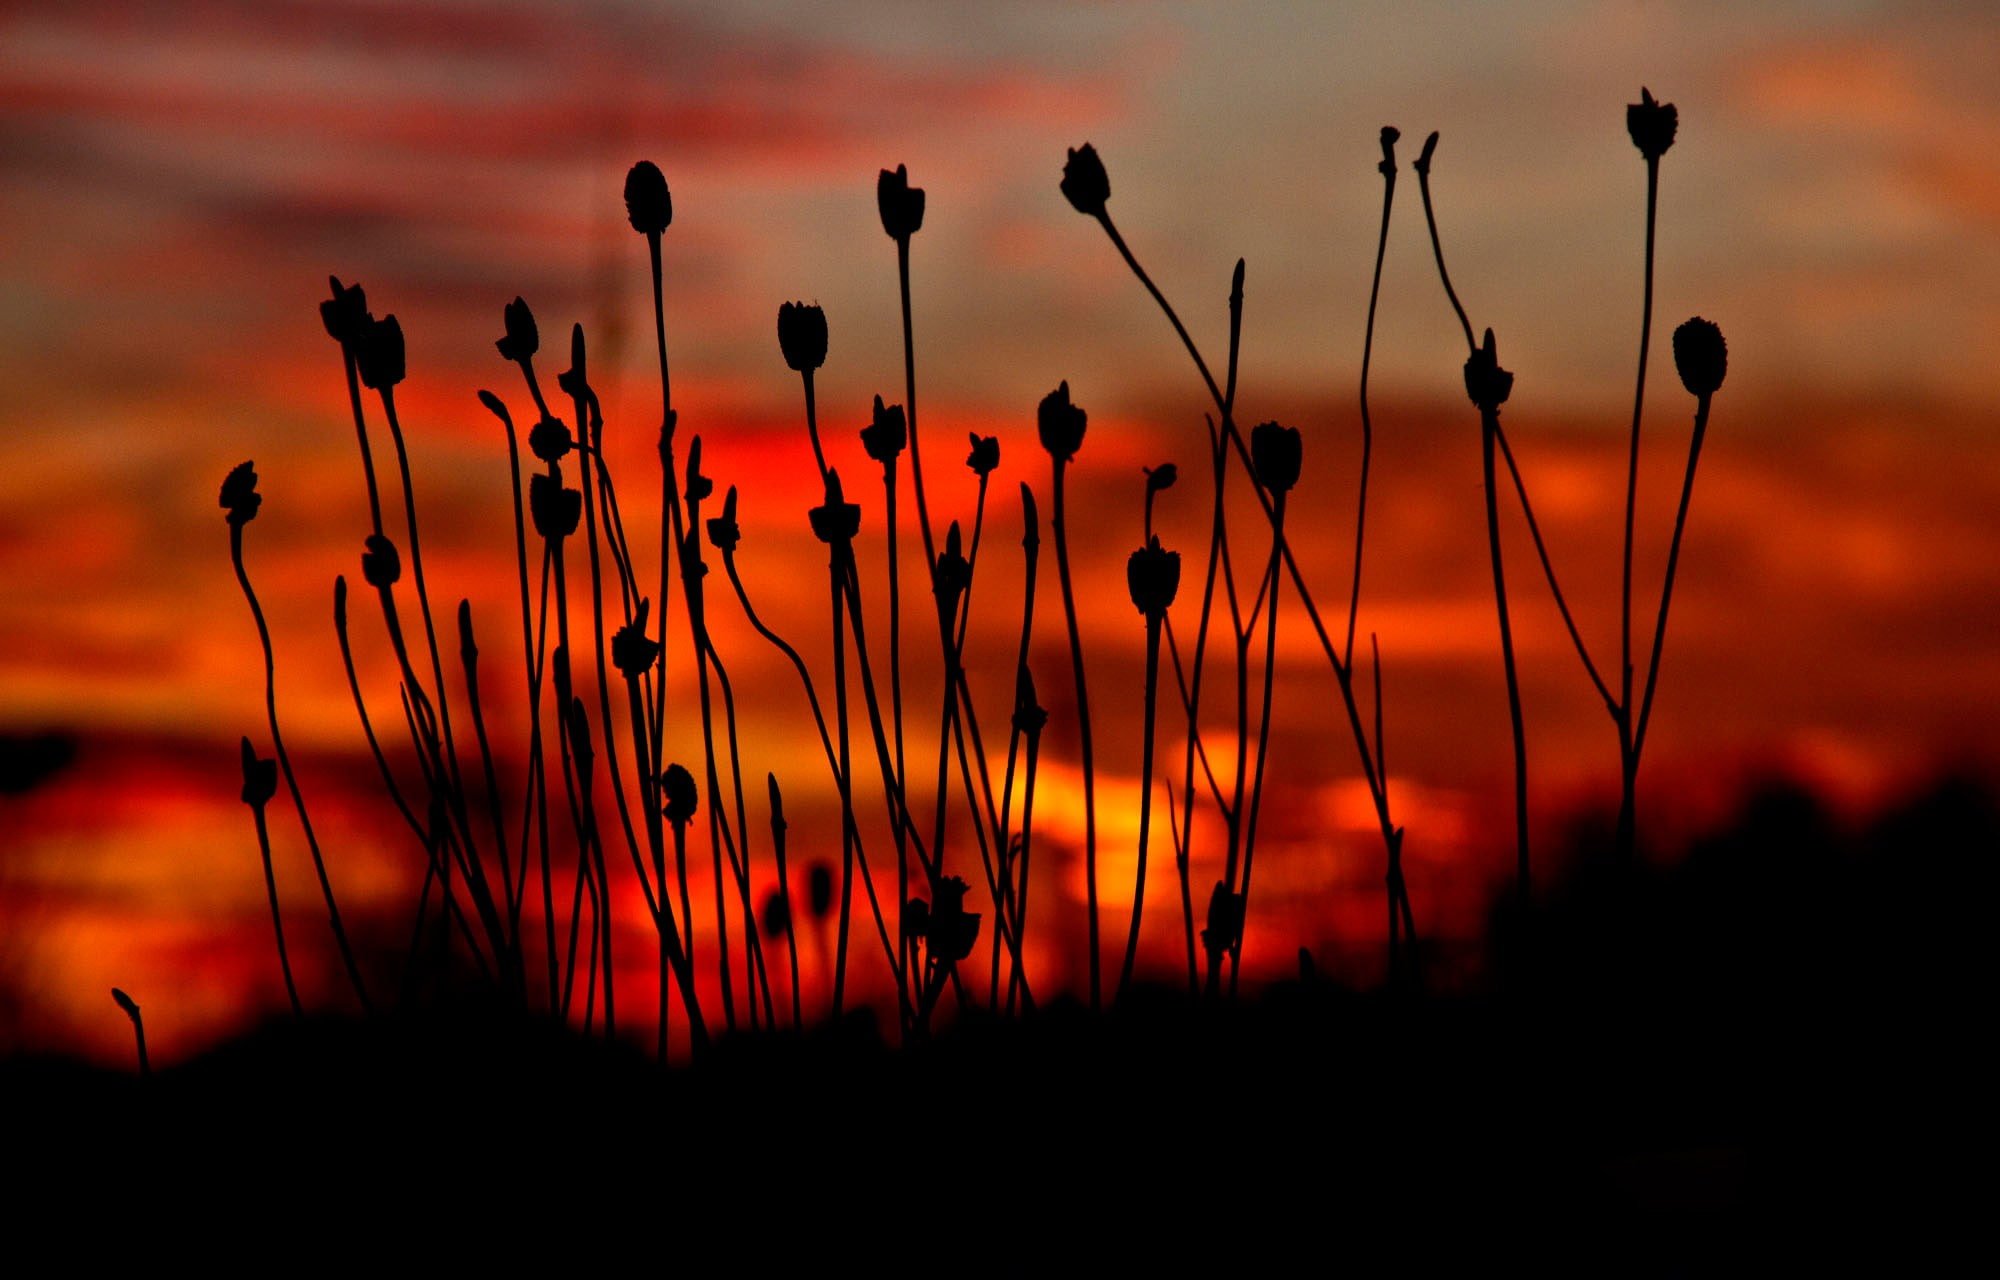 plants, silhouette, sunset, sky, beauty in nature, orange color